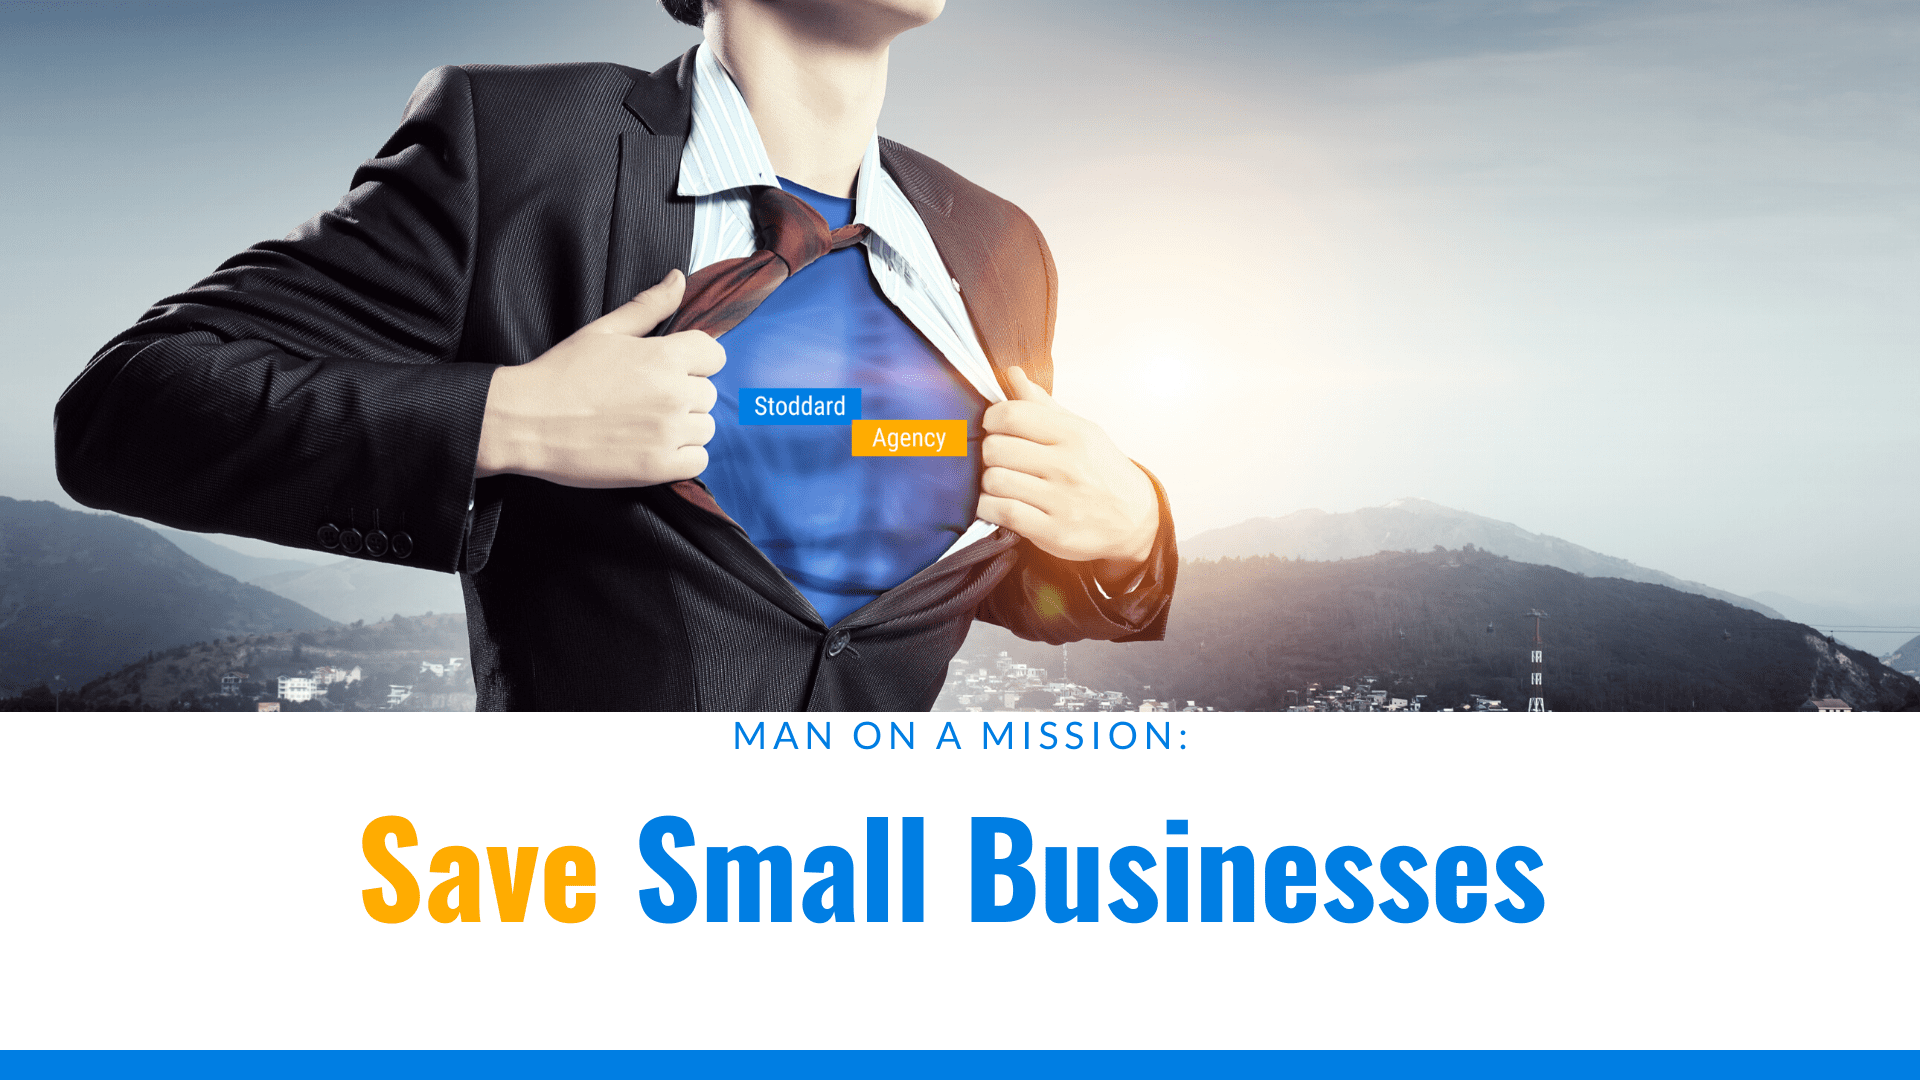 Save Small Businesses